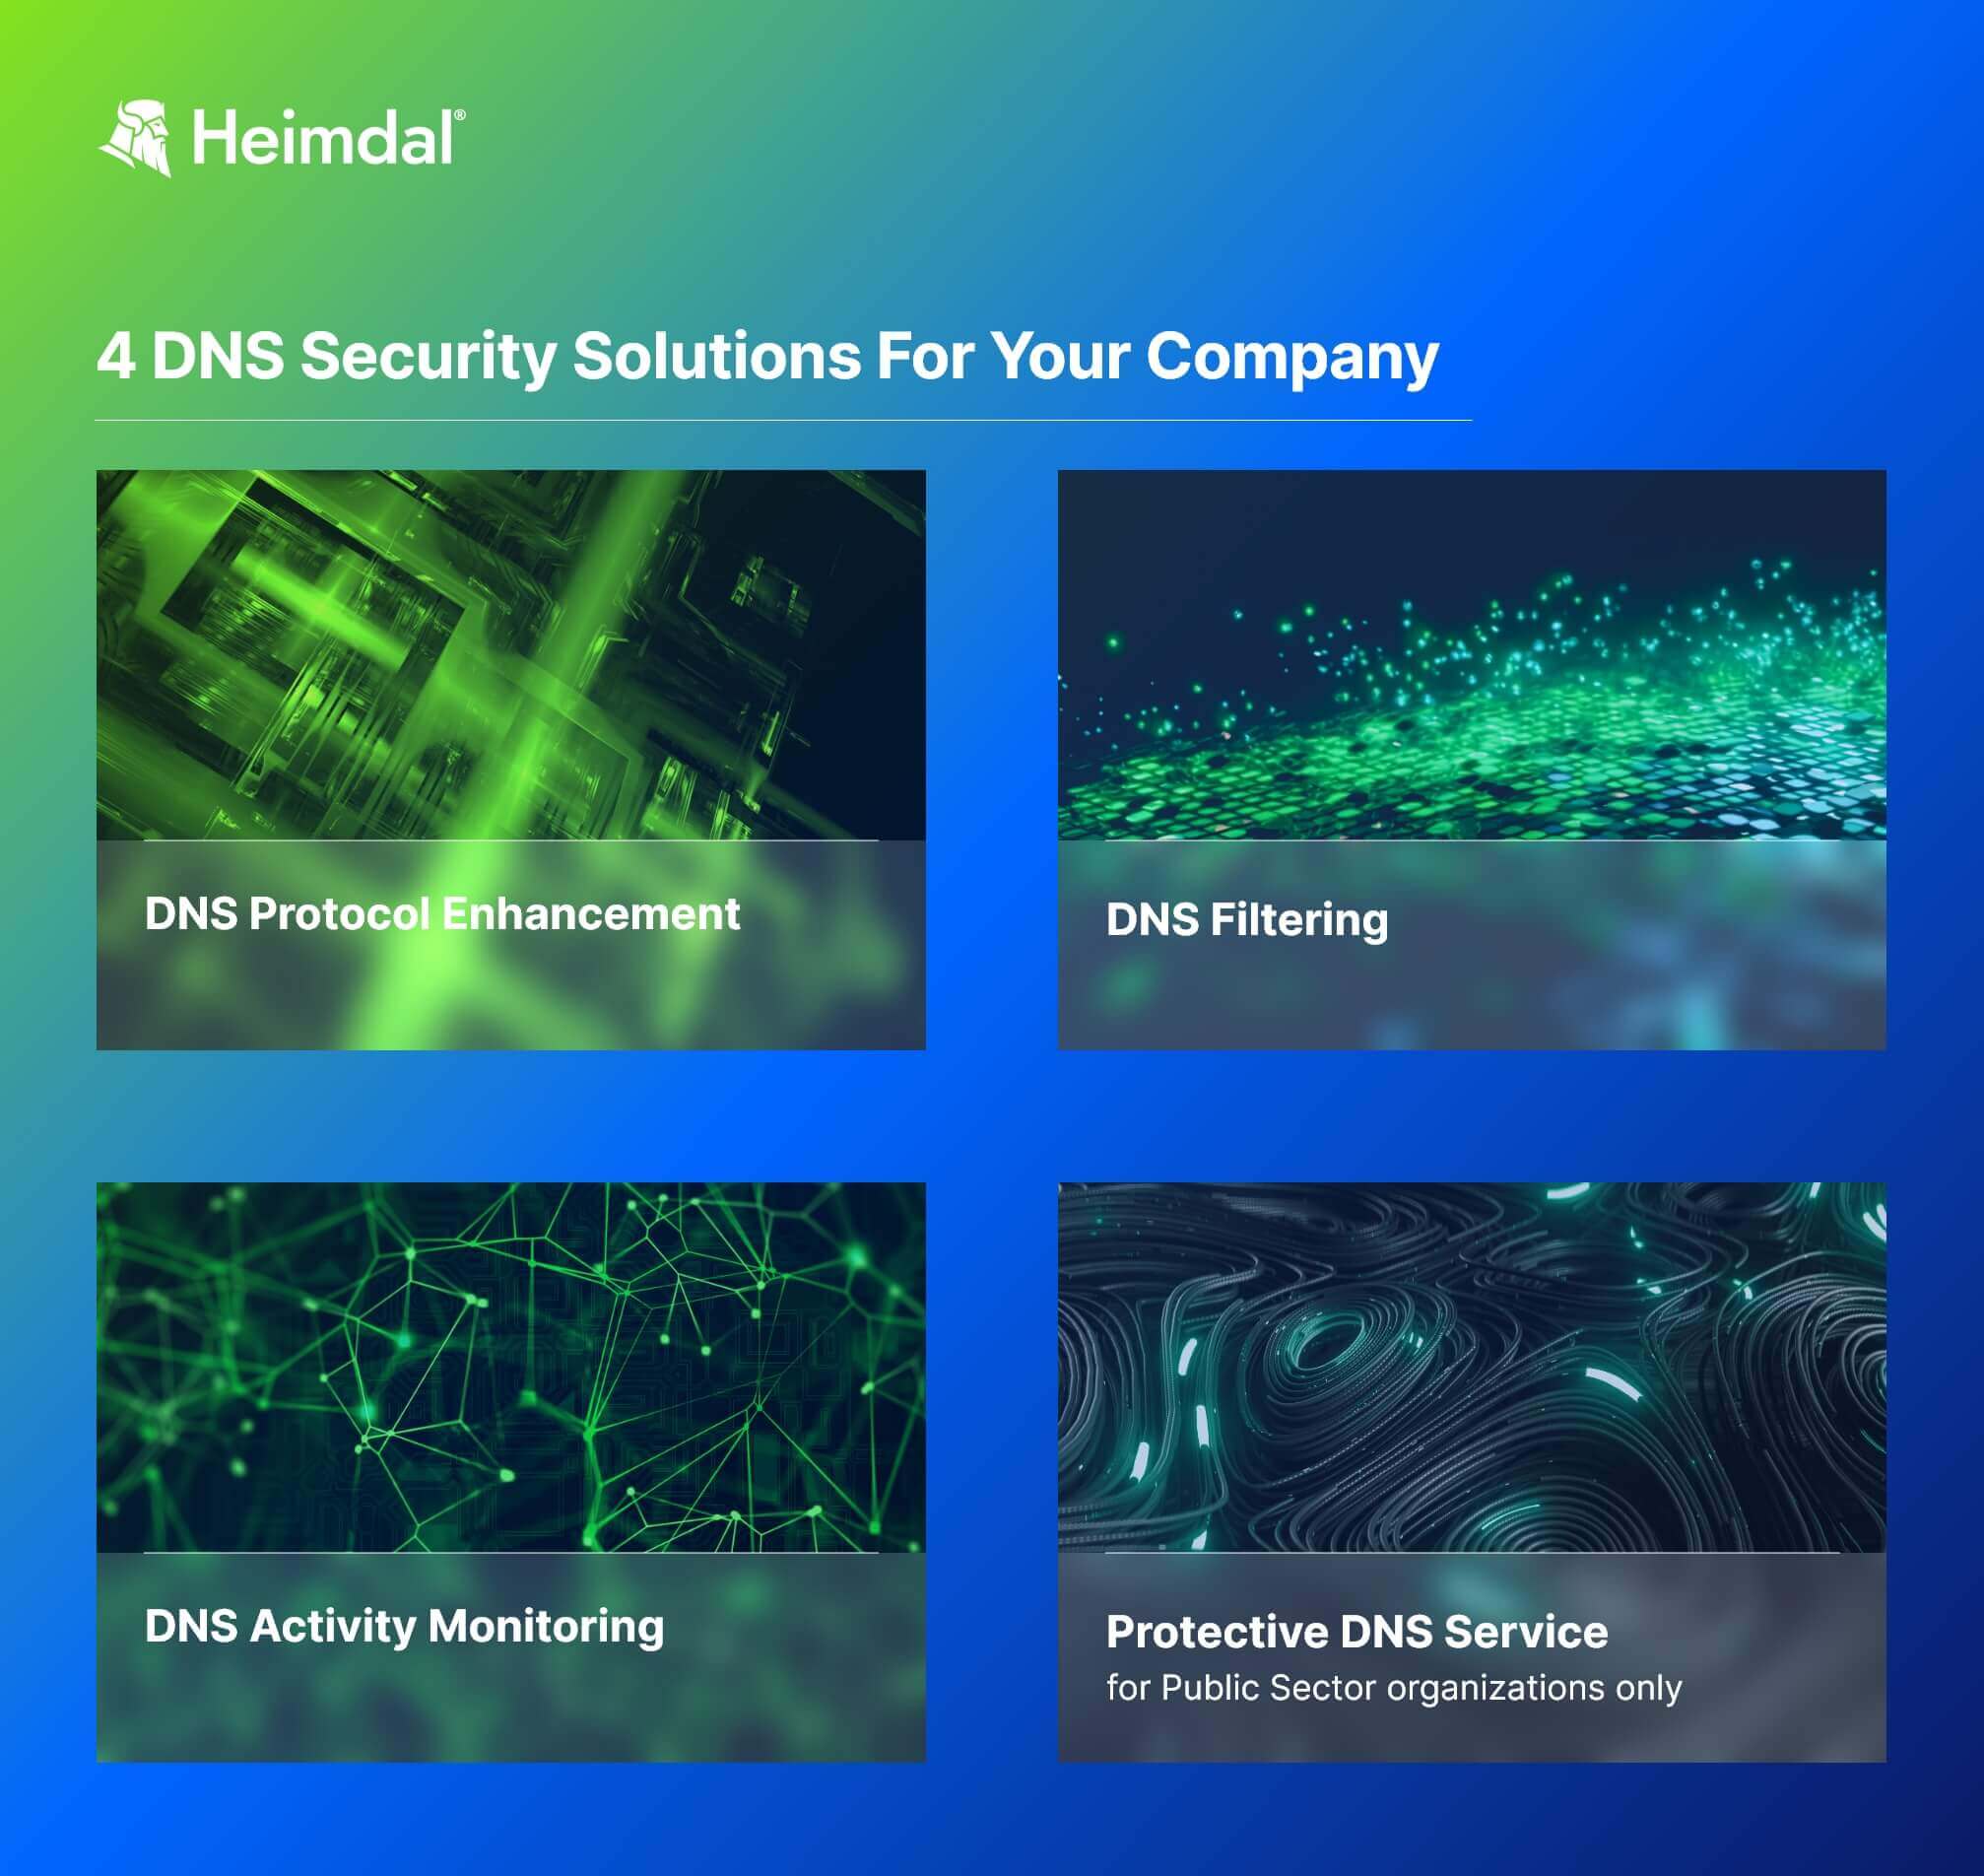 image showcasing 4 DNS security solutions for companies: DNS Protocol Enhacement, DNS Filtering, DNS Activity Monitoring, and Protective DNS Service (suitable for Public Sector Organizations)